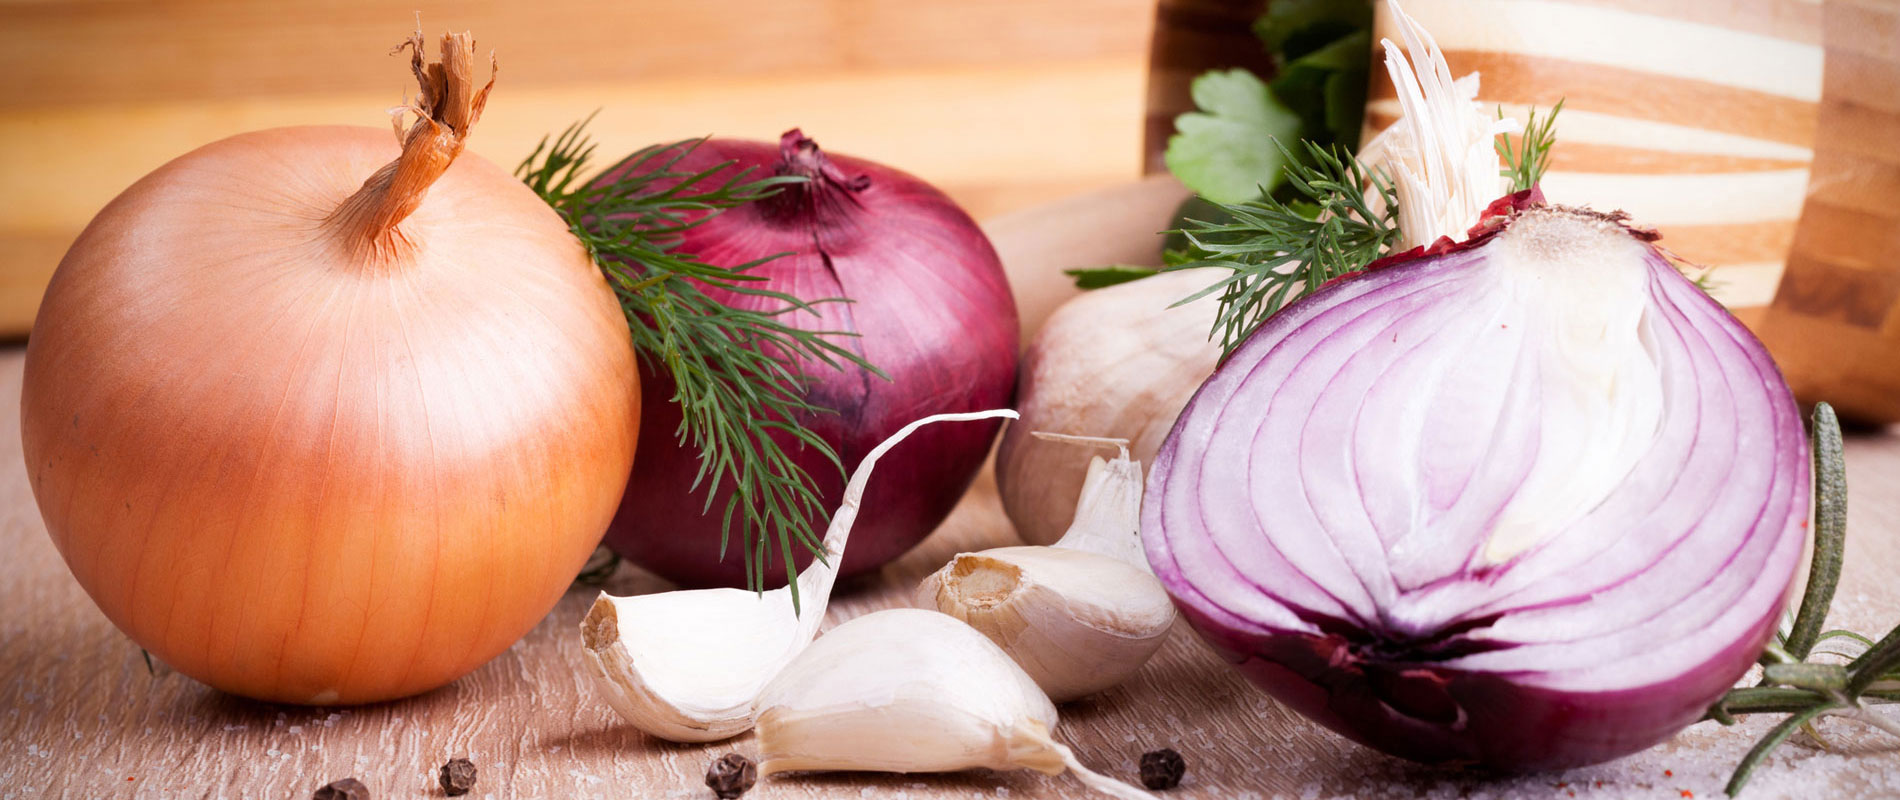 Dehydrated Onion Banner Image